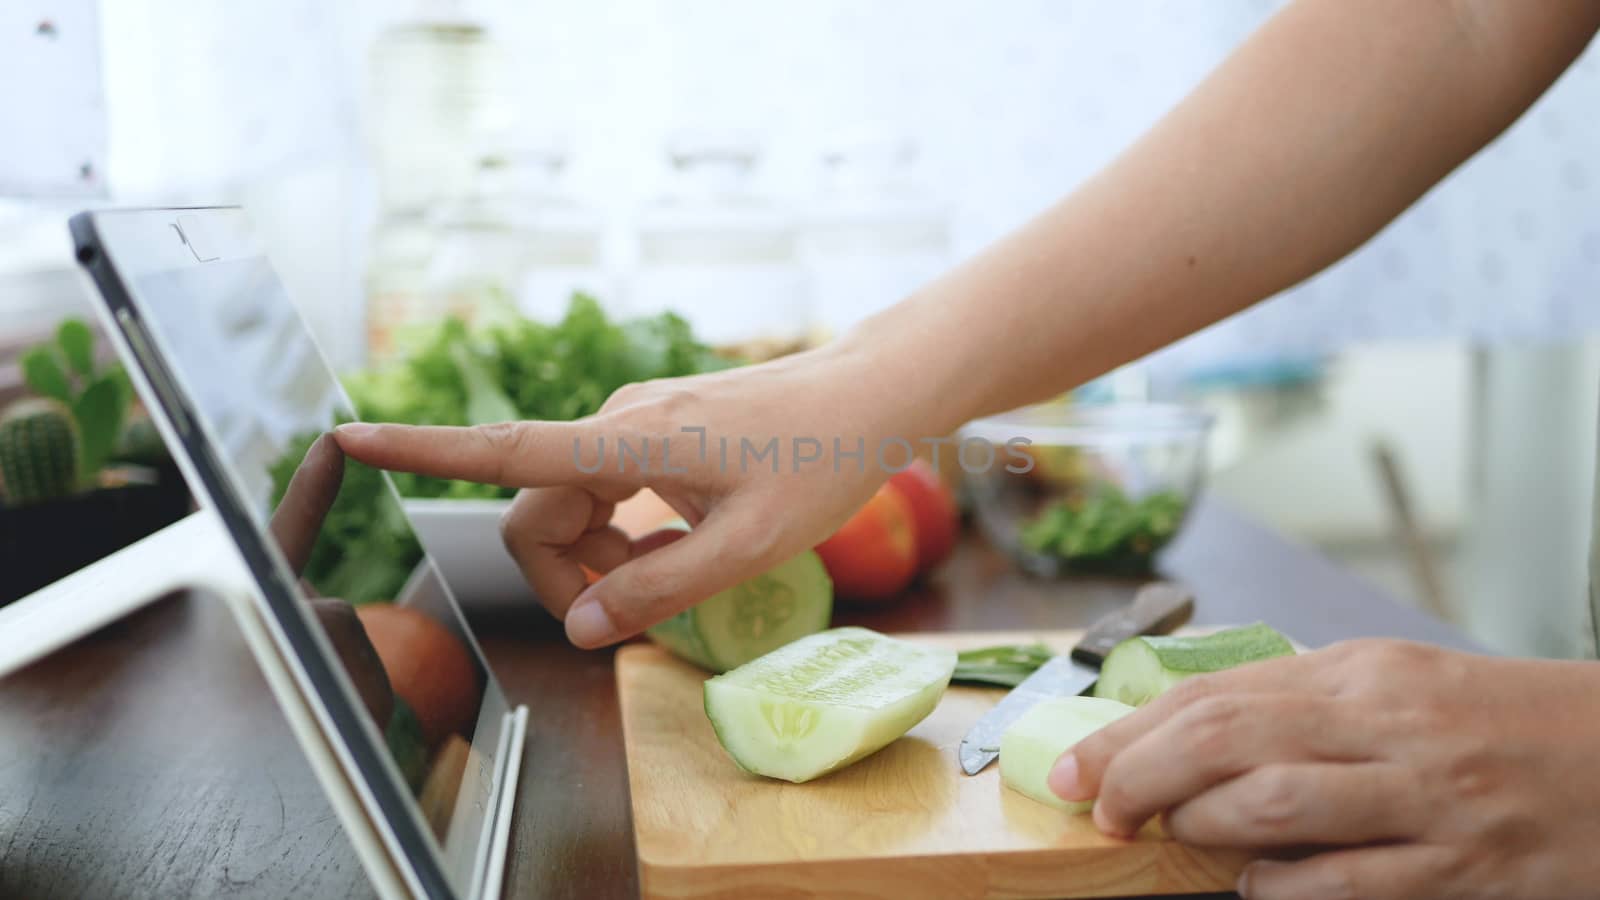 Asian woman use finger slide on tablet screen prepare ingredients for cooking follow cooking online video clip on website. cooking content on internet technology for modern lifestyle concept